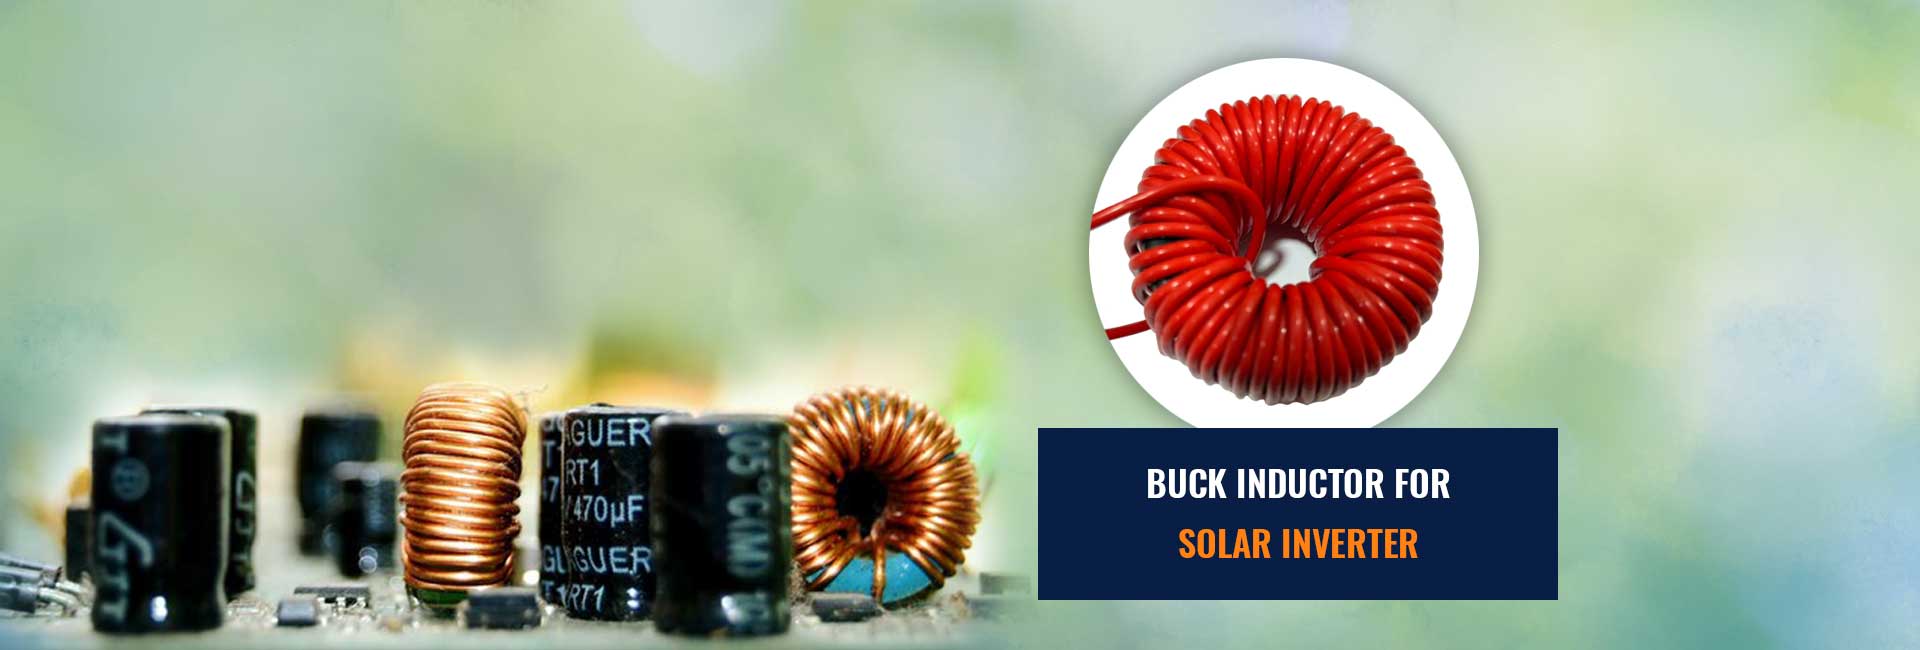 Buck Inductor for Solar Inductor